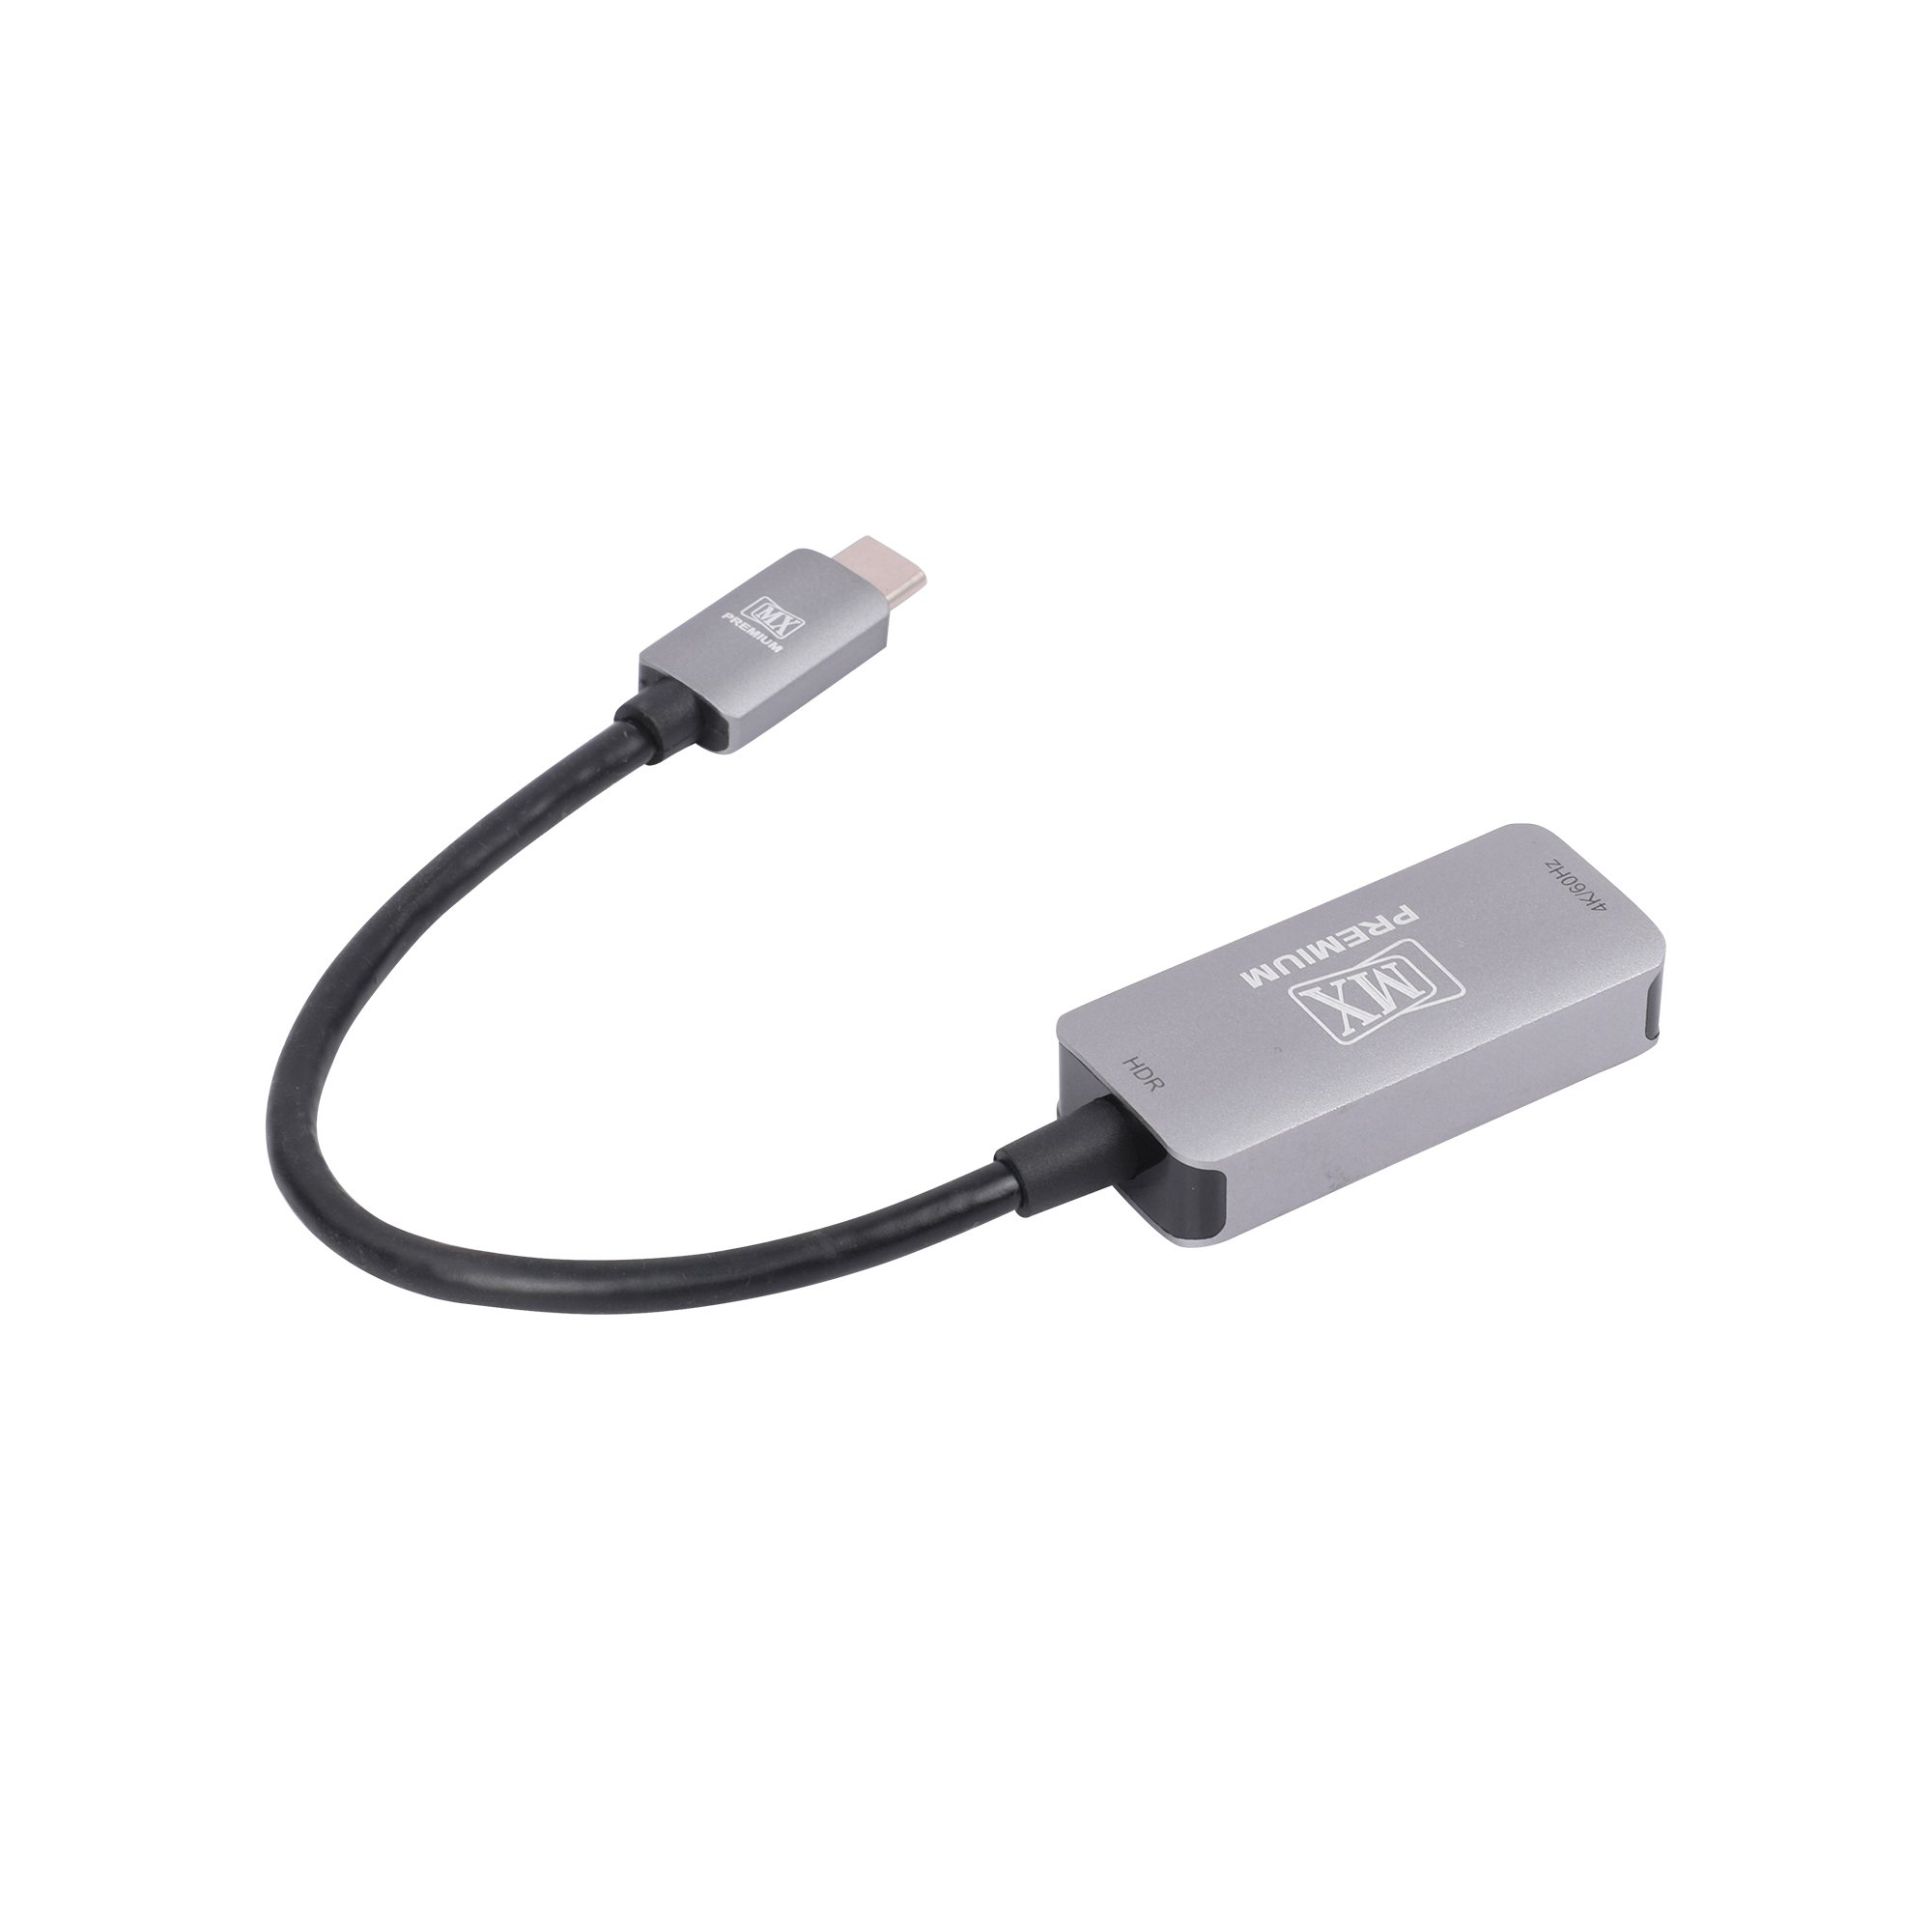 USB-C® to HDMI® Adapter Converter - 4K 60Hz, HDMI Adapters and Couplers, HDMI